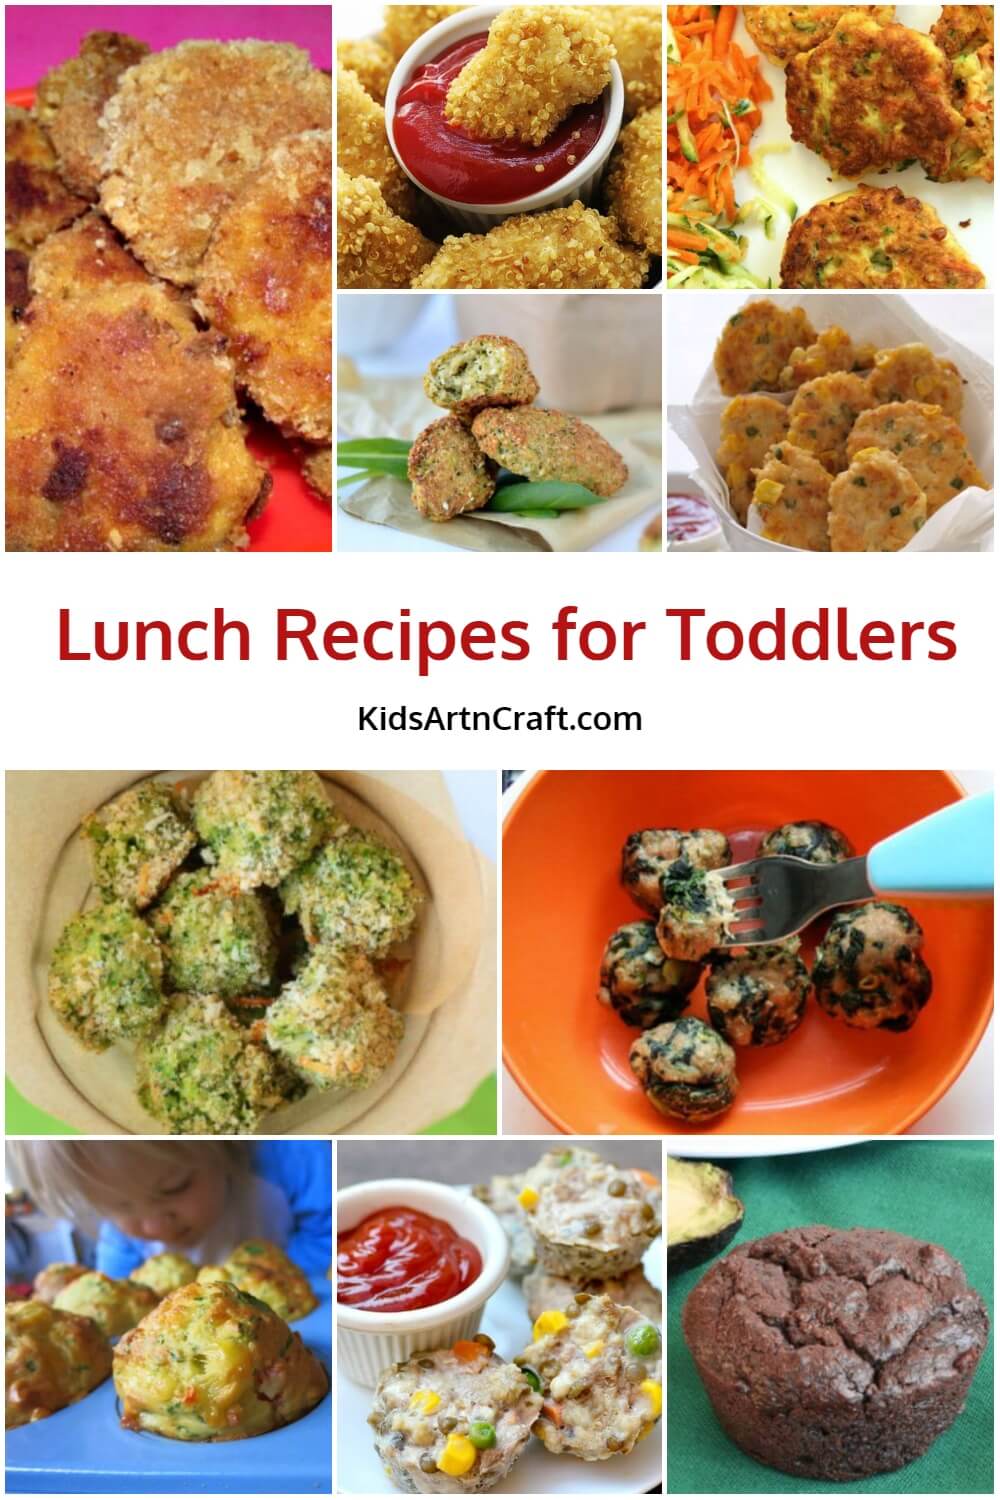 Lunch Recipes for Toddlers - Kids Art & Craft